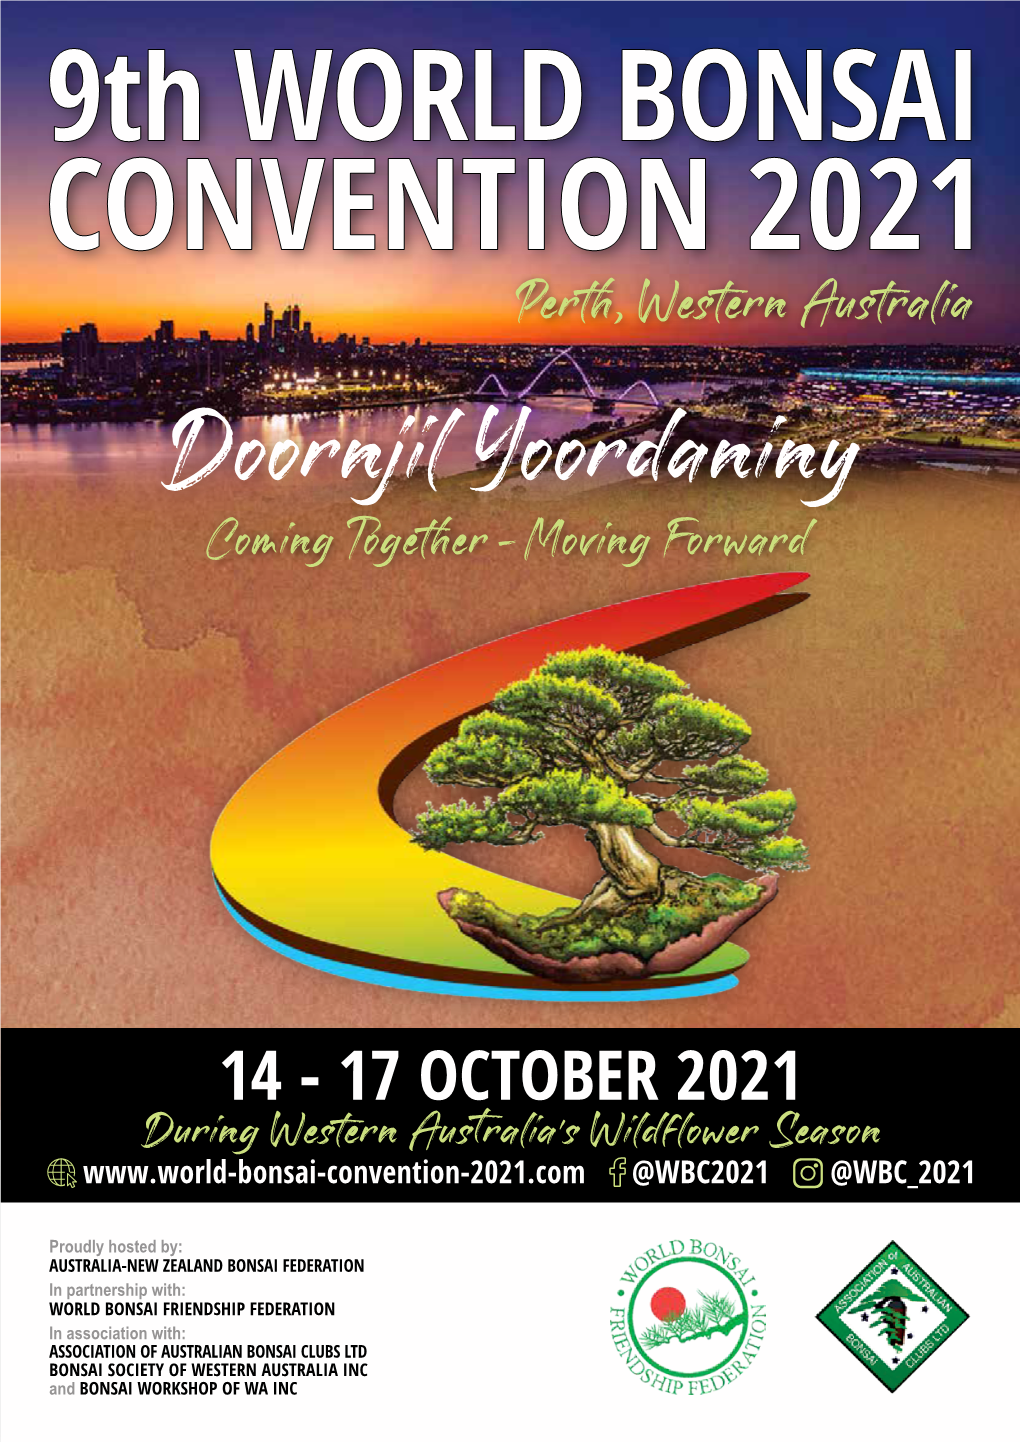 9TH WORLD BONSAI CONVENTION 2021 Doornjil Yoordaniny Coming Together - Moving Forward 14 - 17 October 2021 Perth, Western Australia CONVENTION PROGRAMME